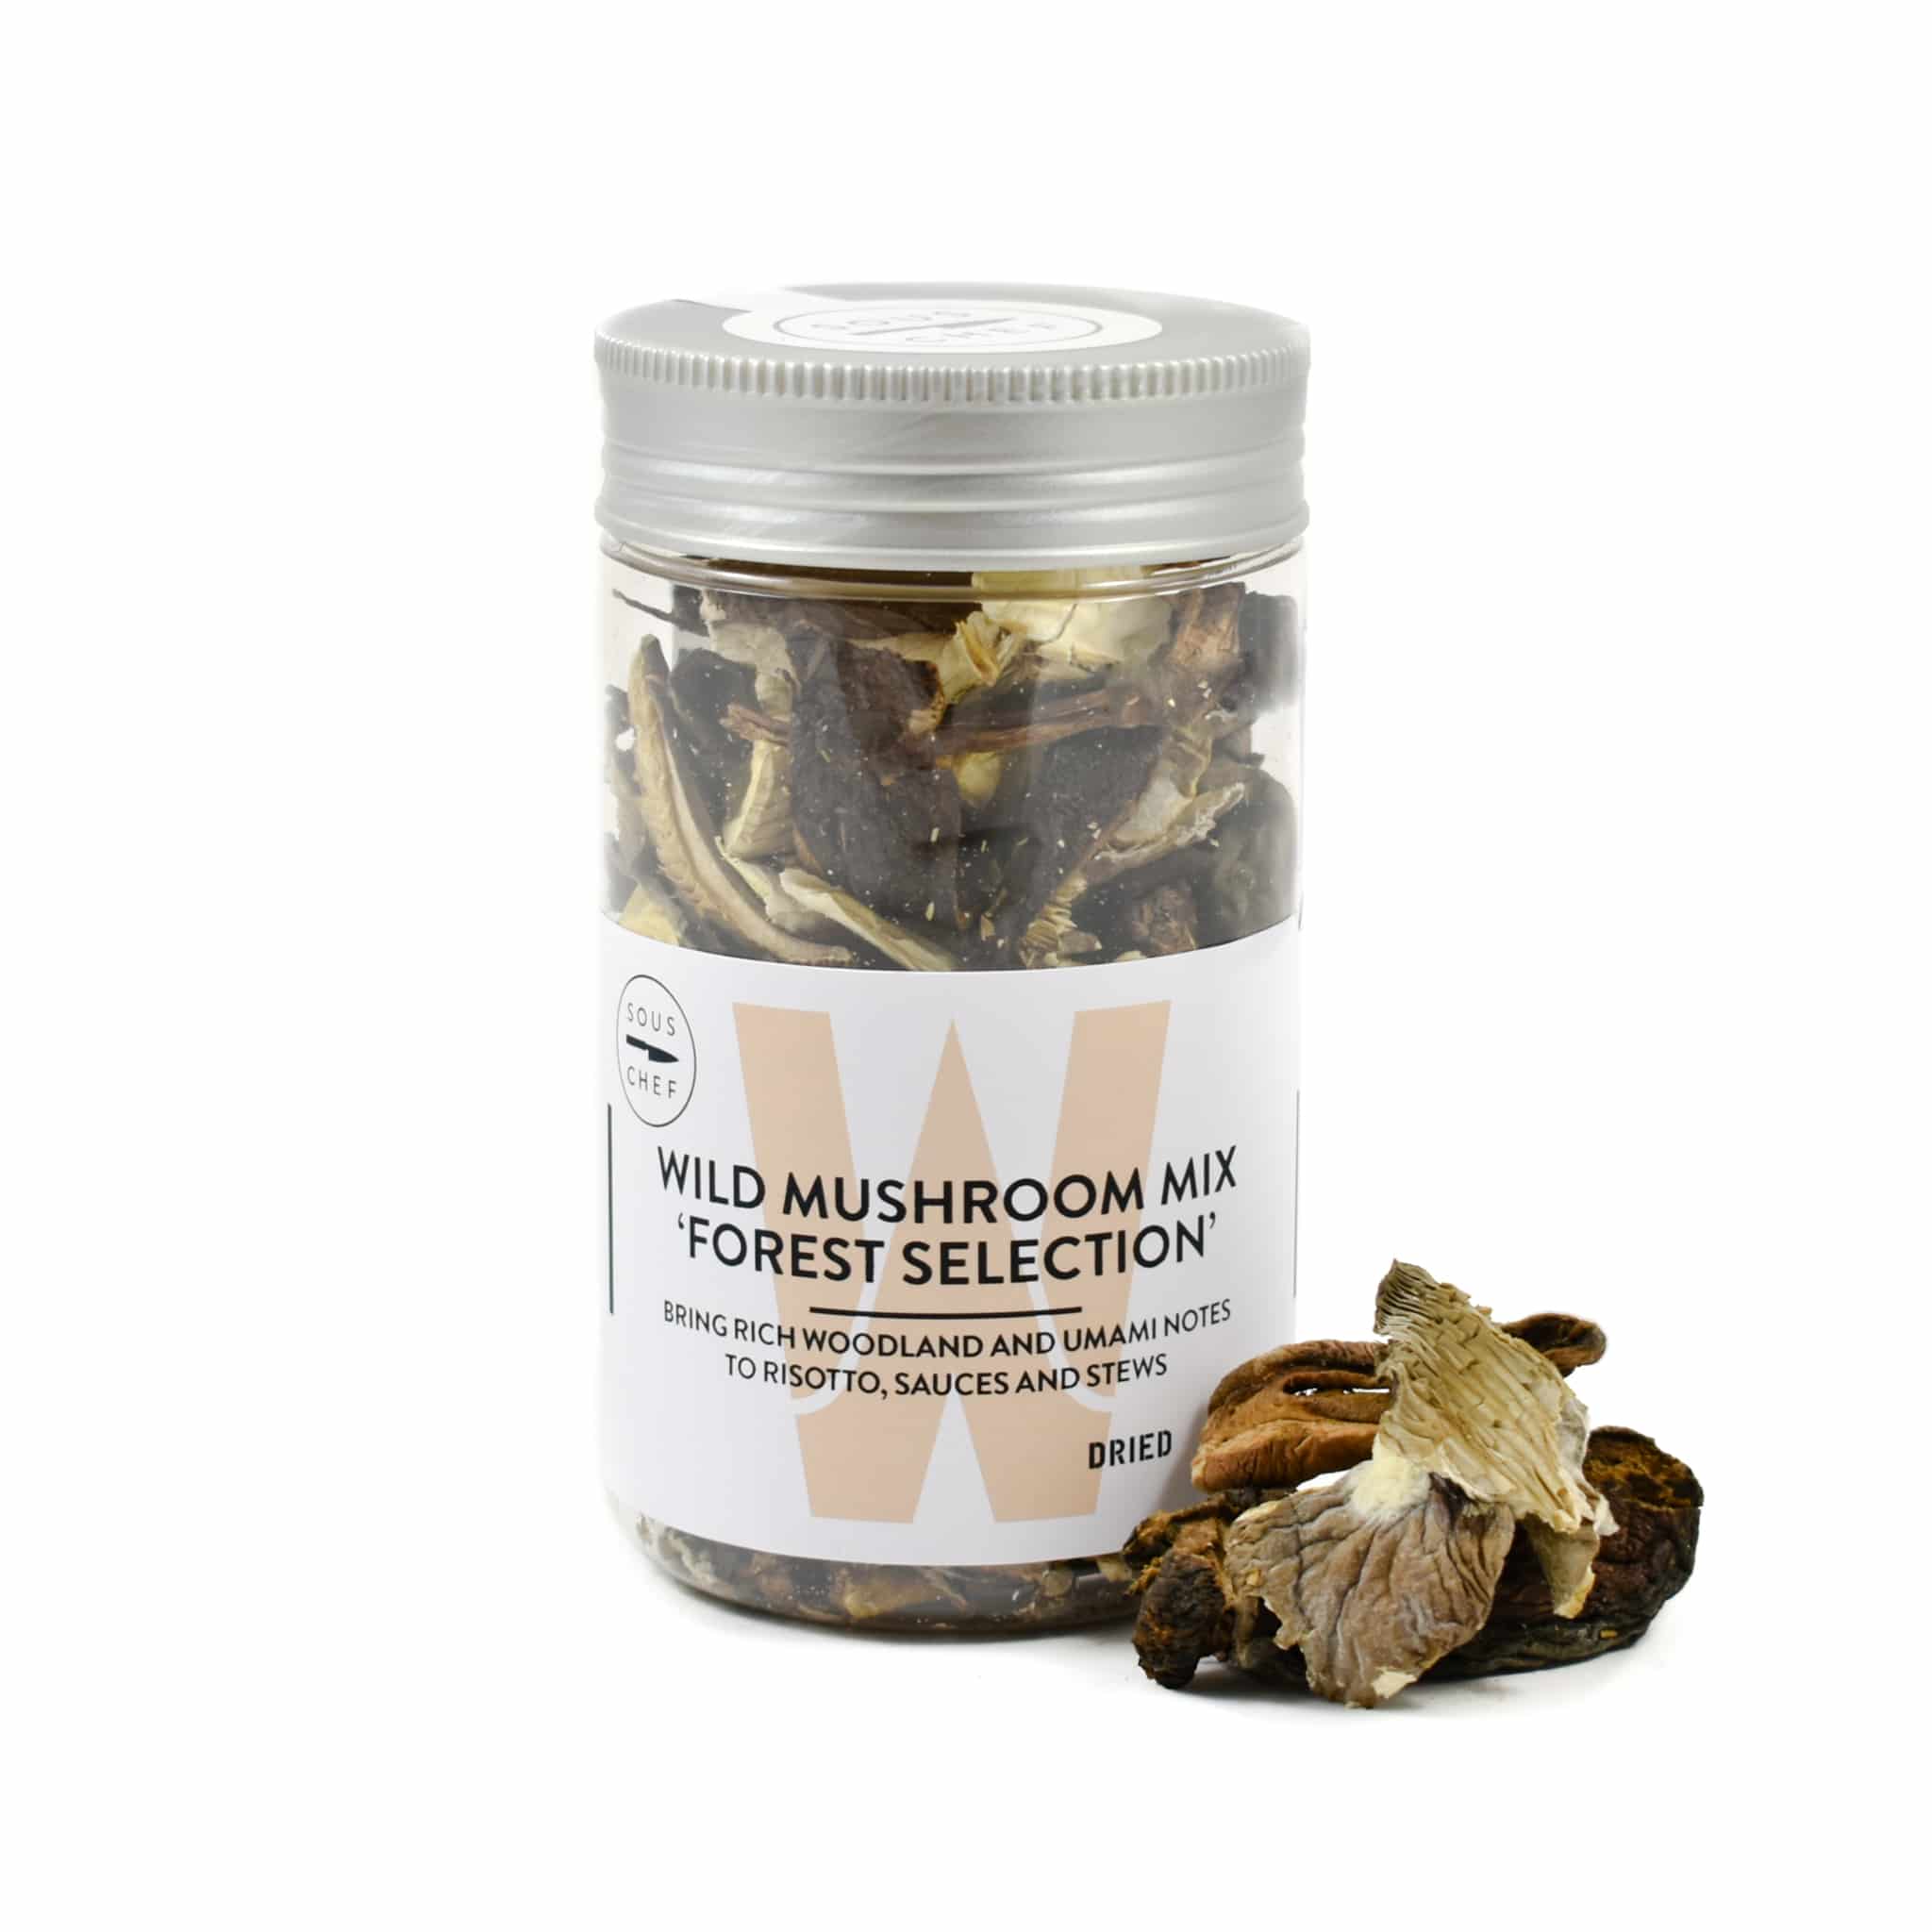 Sous Chef Wild Mushroom Mix - 'Forest Selection'